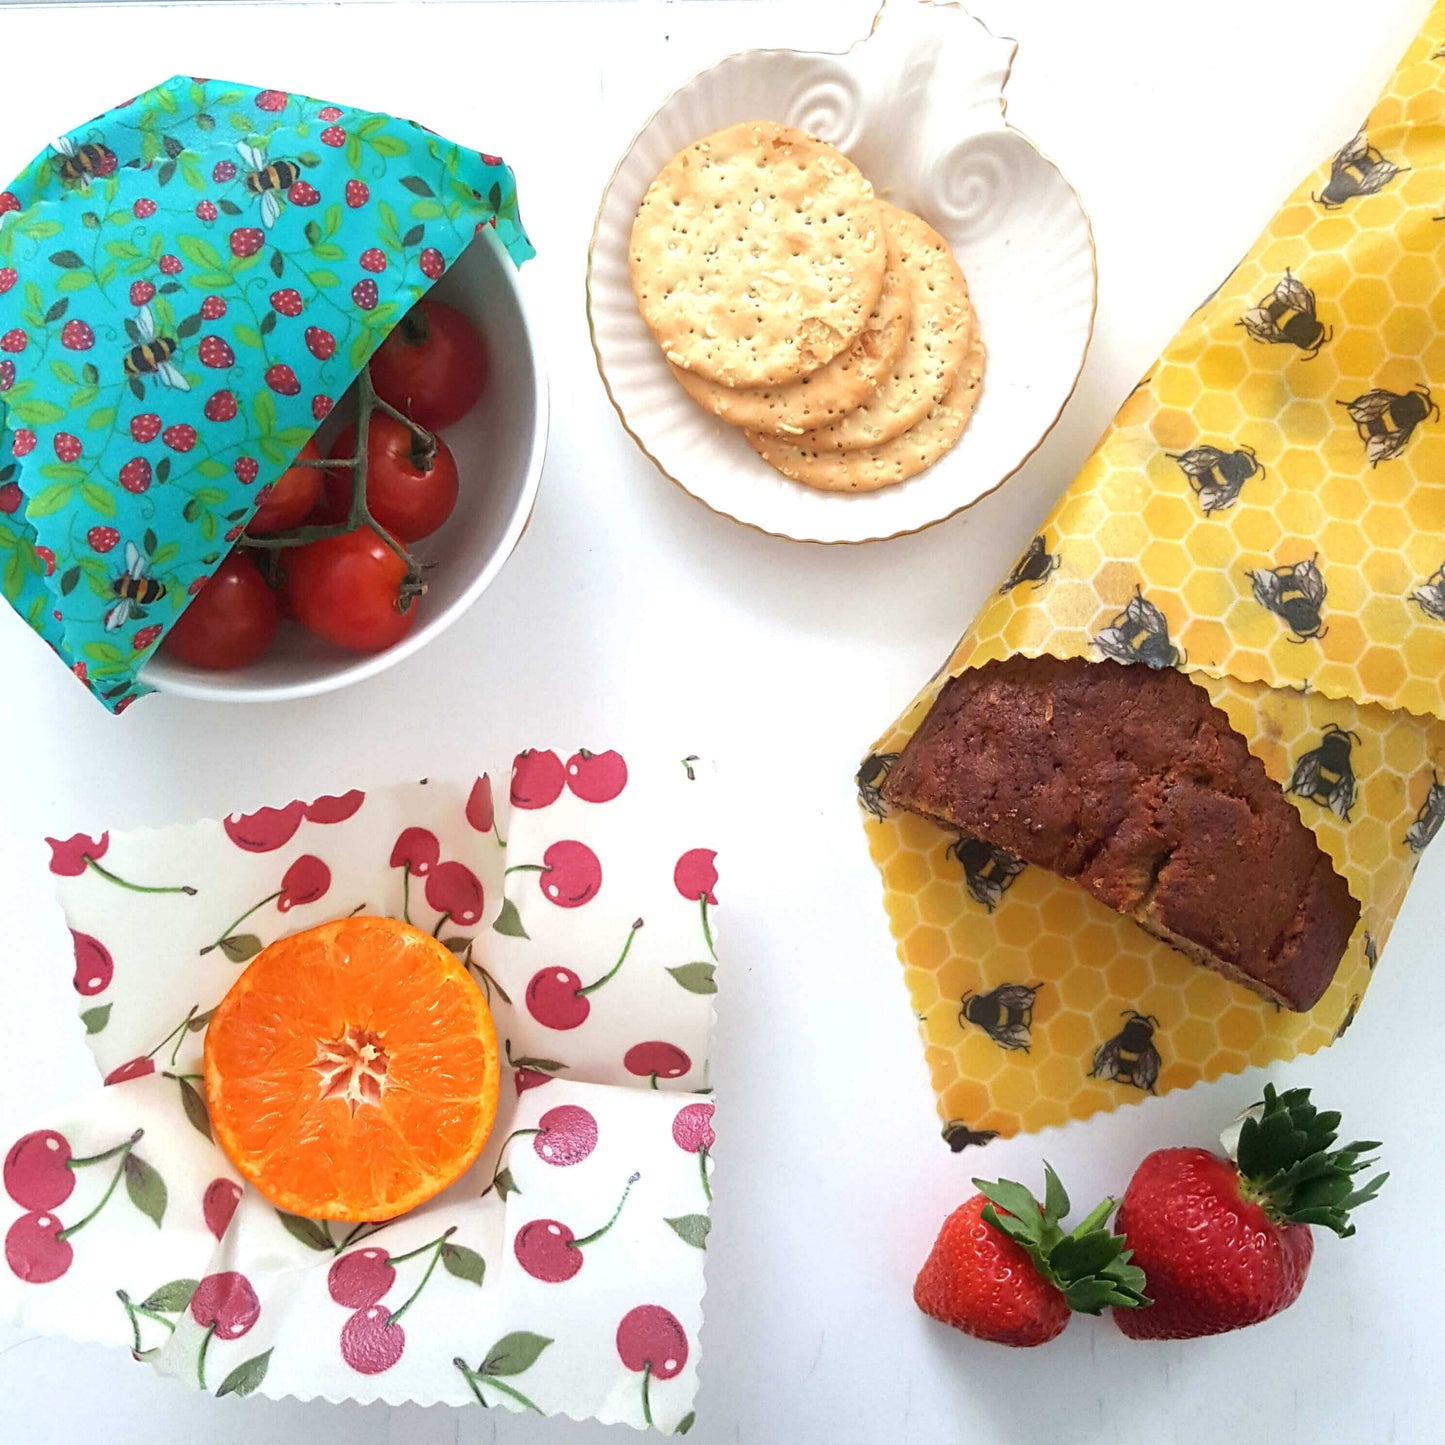 ReReusable Beeswax Food Wraps 100% Hand Made in the UK by Honey Bee Good. Earth Kind Classic set of 3 in Bees & Cherries flatlay